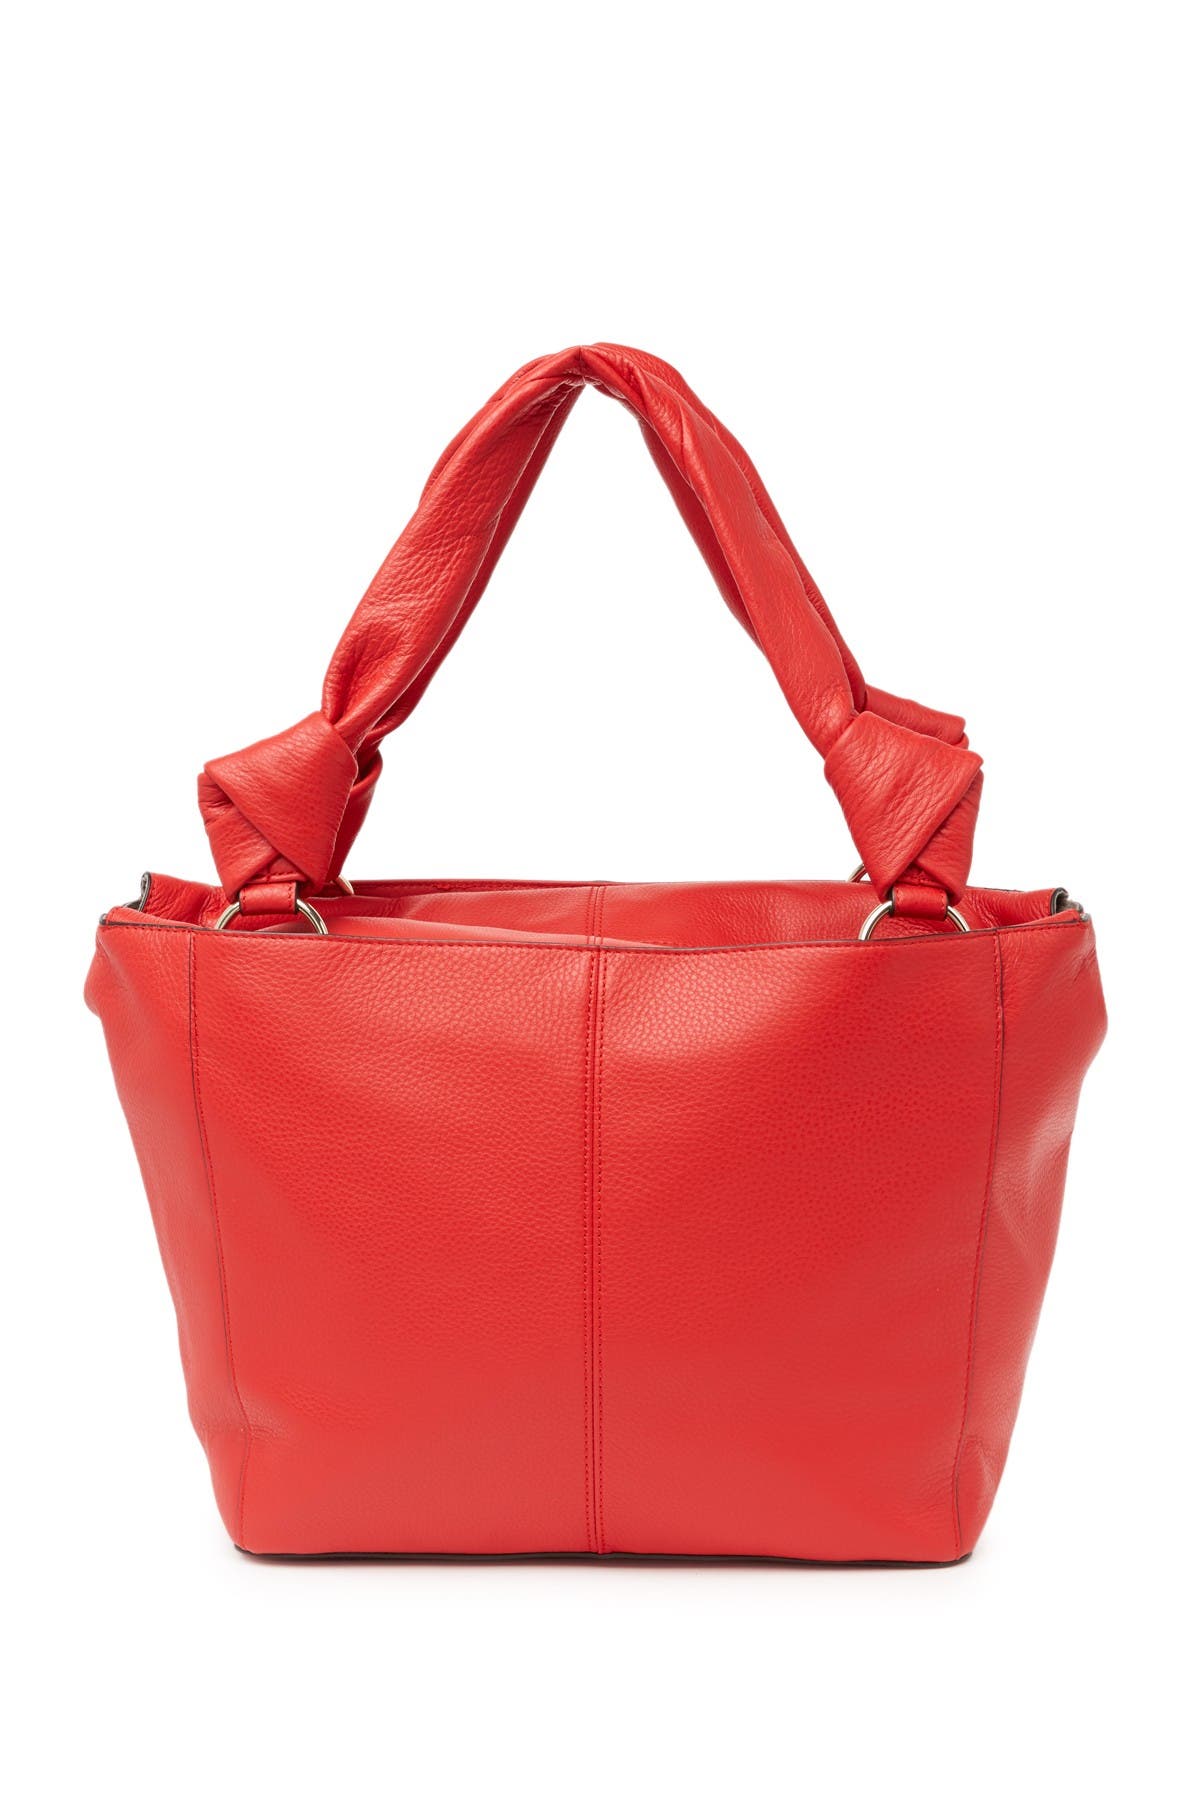 Vince Camuto Dian Pebbled Leather Tote In Red 01